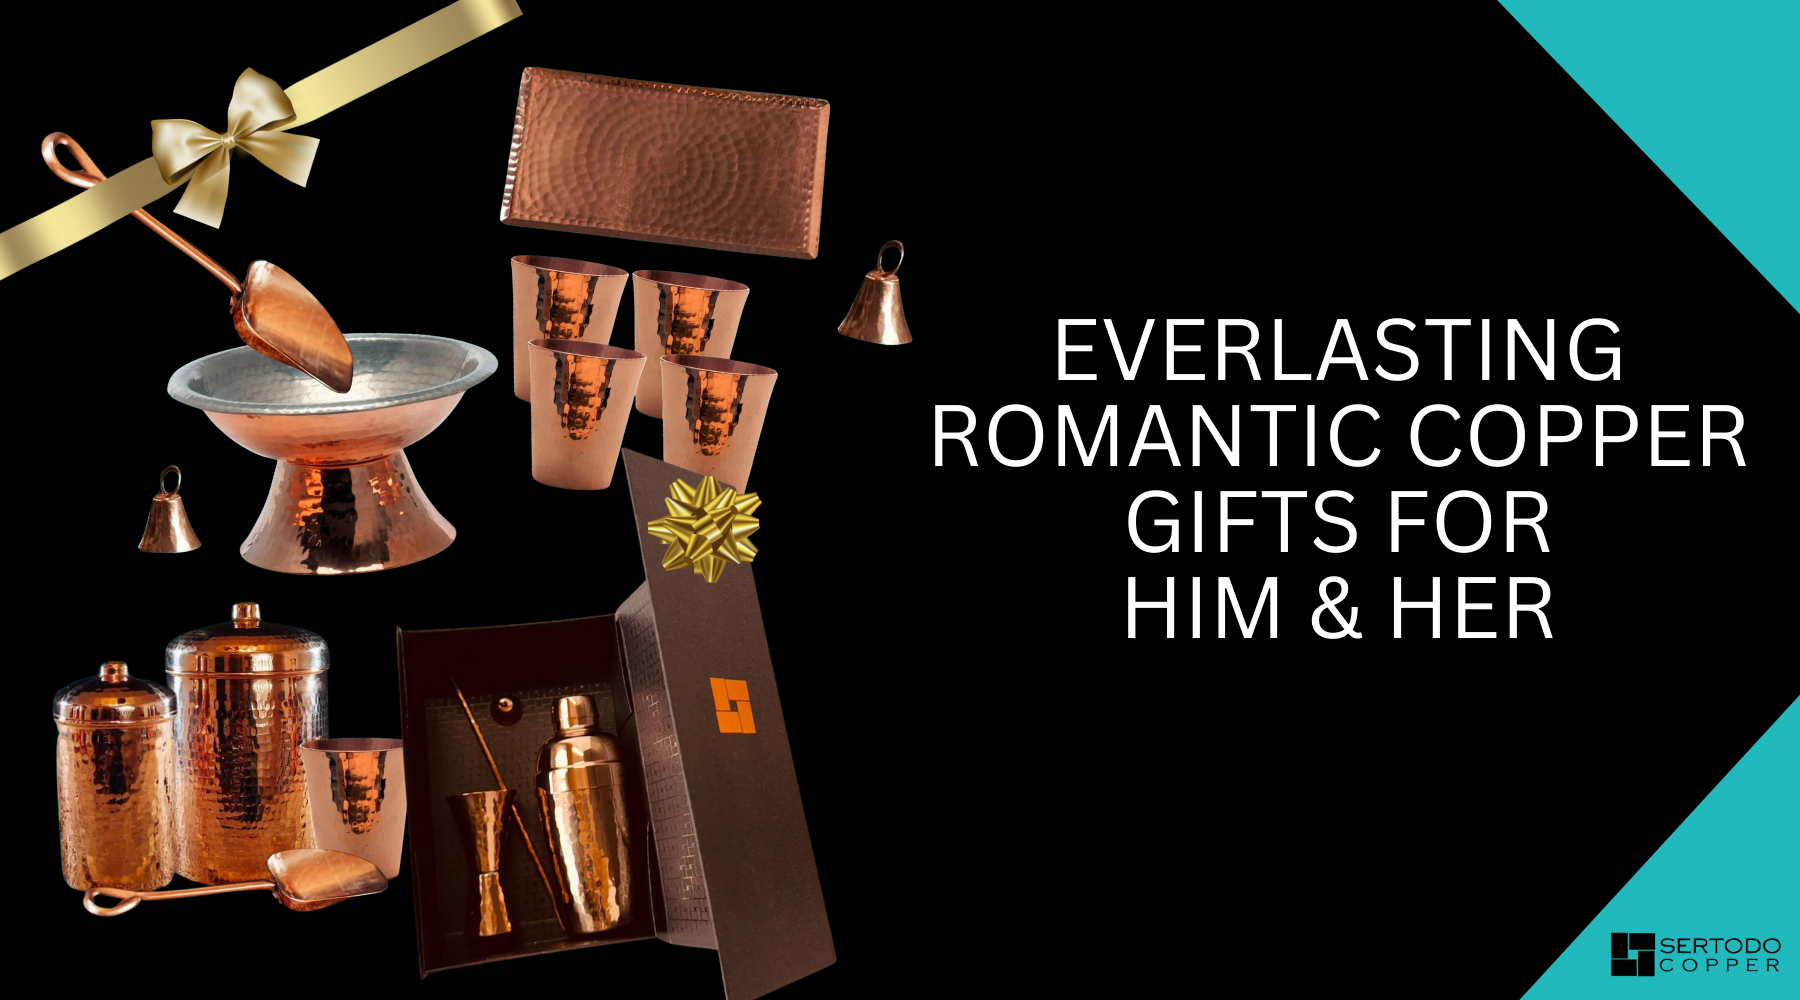 Everlasting romantic copper gifts for him and her